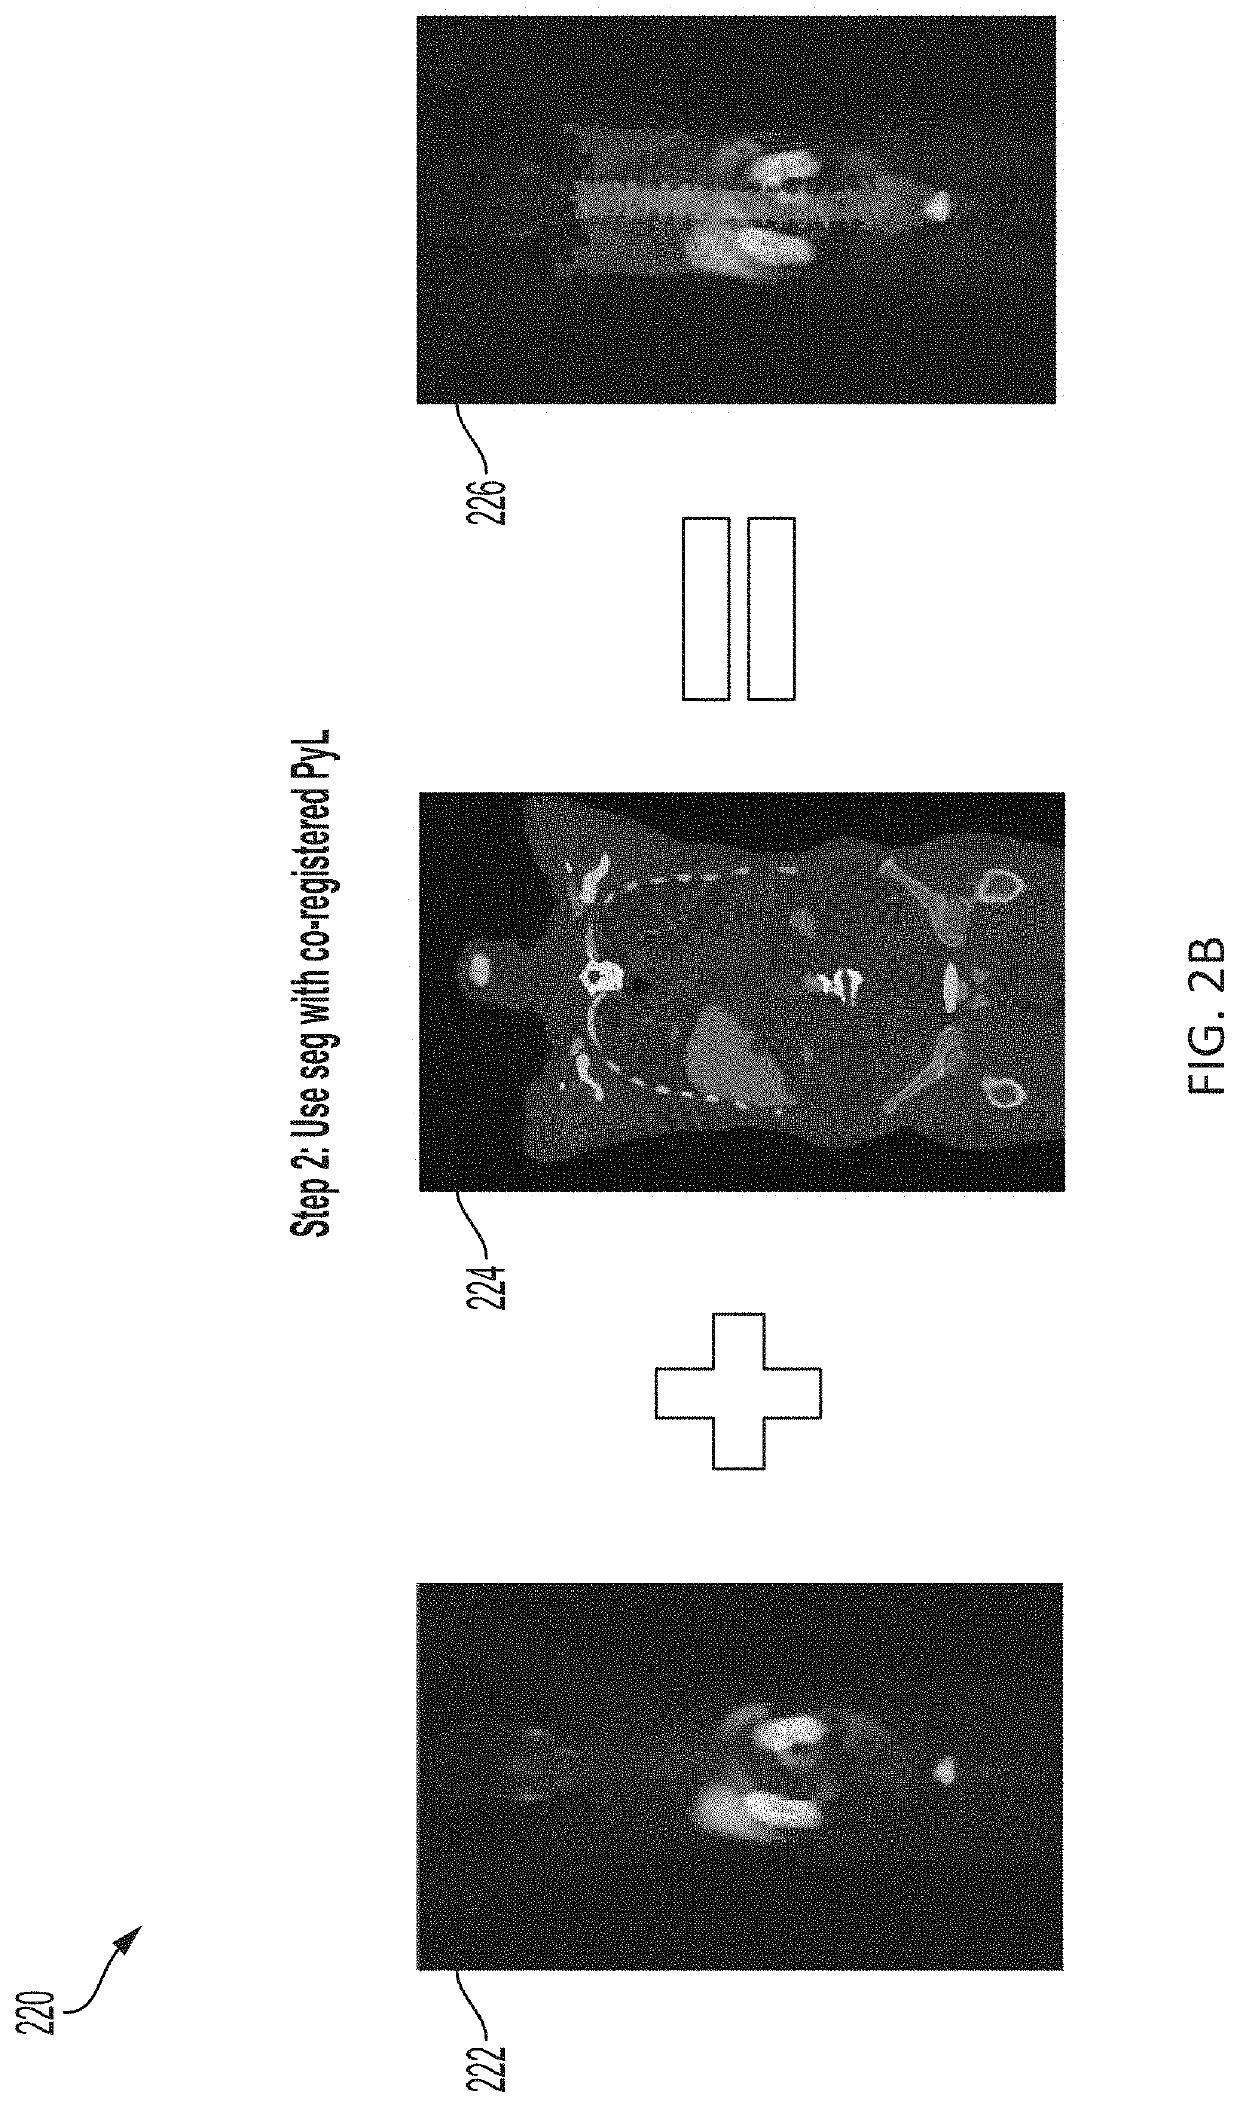 Systems and methods for artificial intelligence-based image analysis for cancer assessment